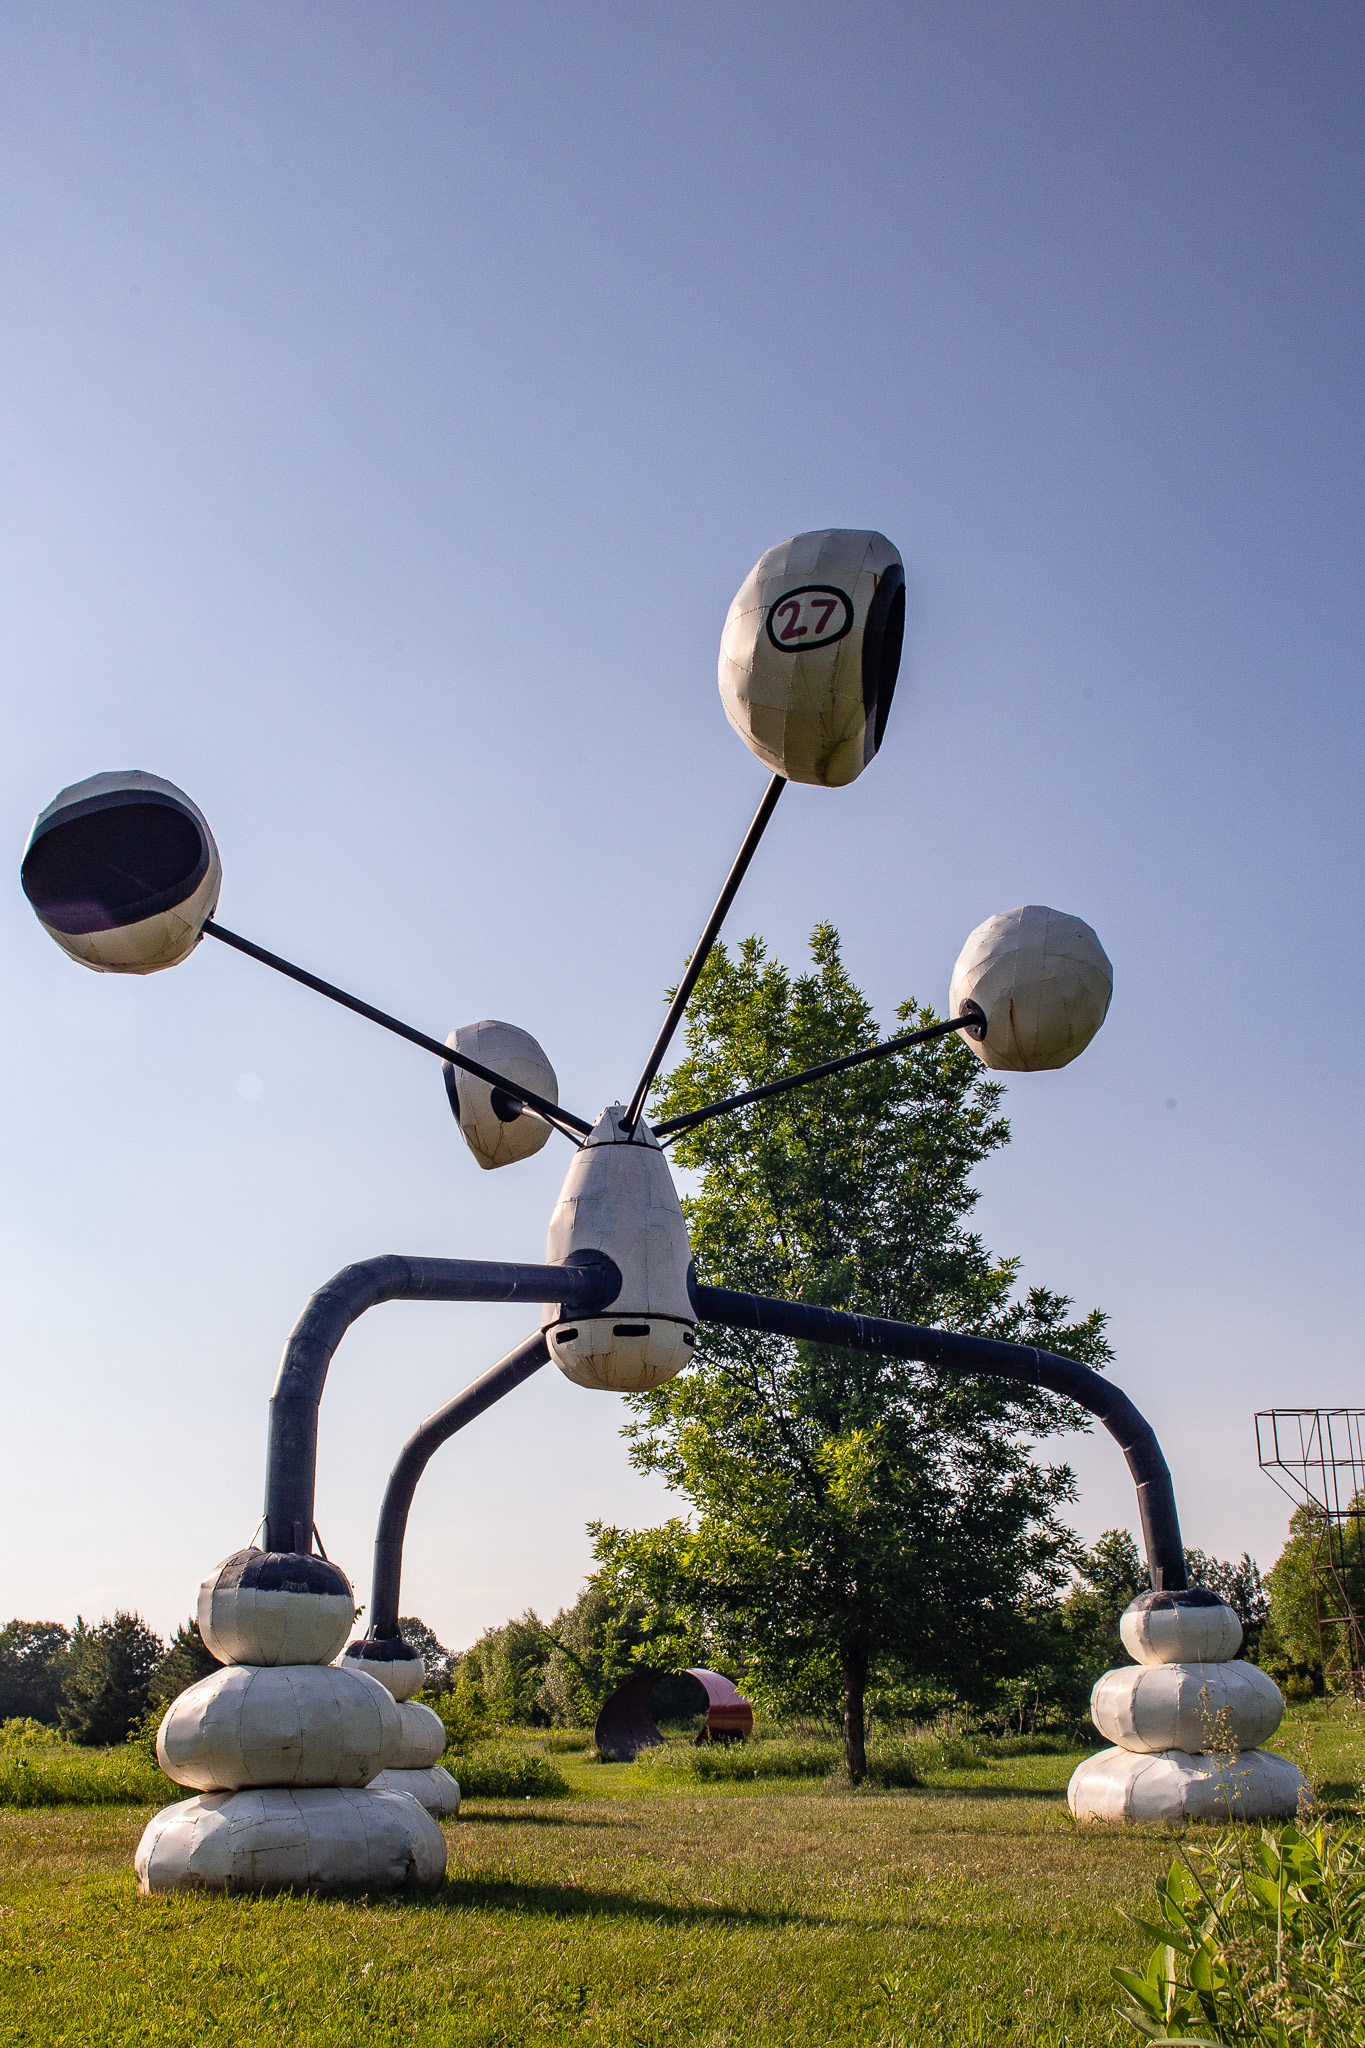 ‘Rocco’
by Amy Toscani (2009)
Photo taken at Franconia Sculpture Park, 2023